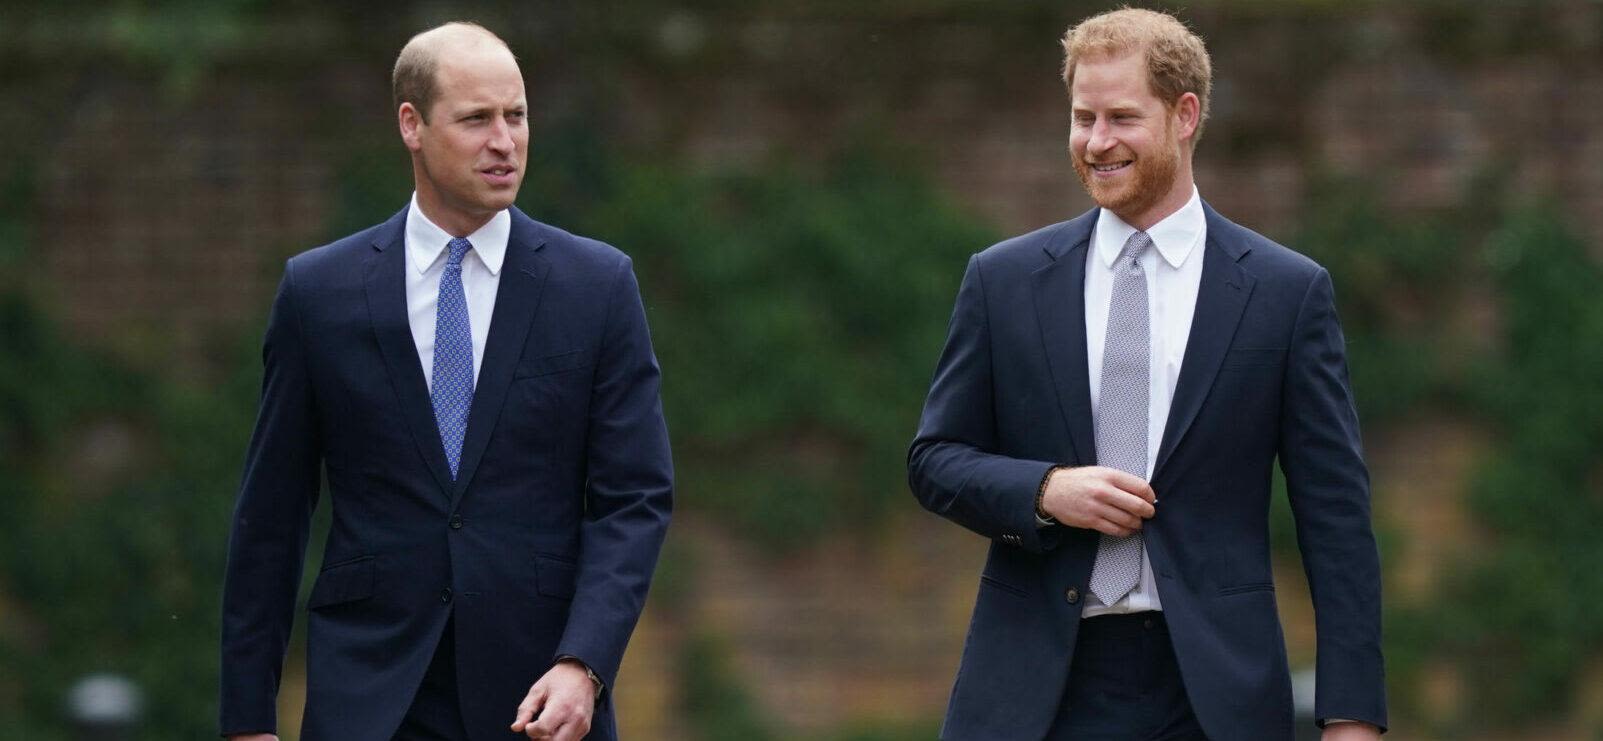 Prince Harry Was Allegedly Left 'In Tears' After Military Role Was Given To Prince William